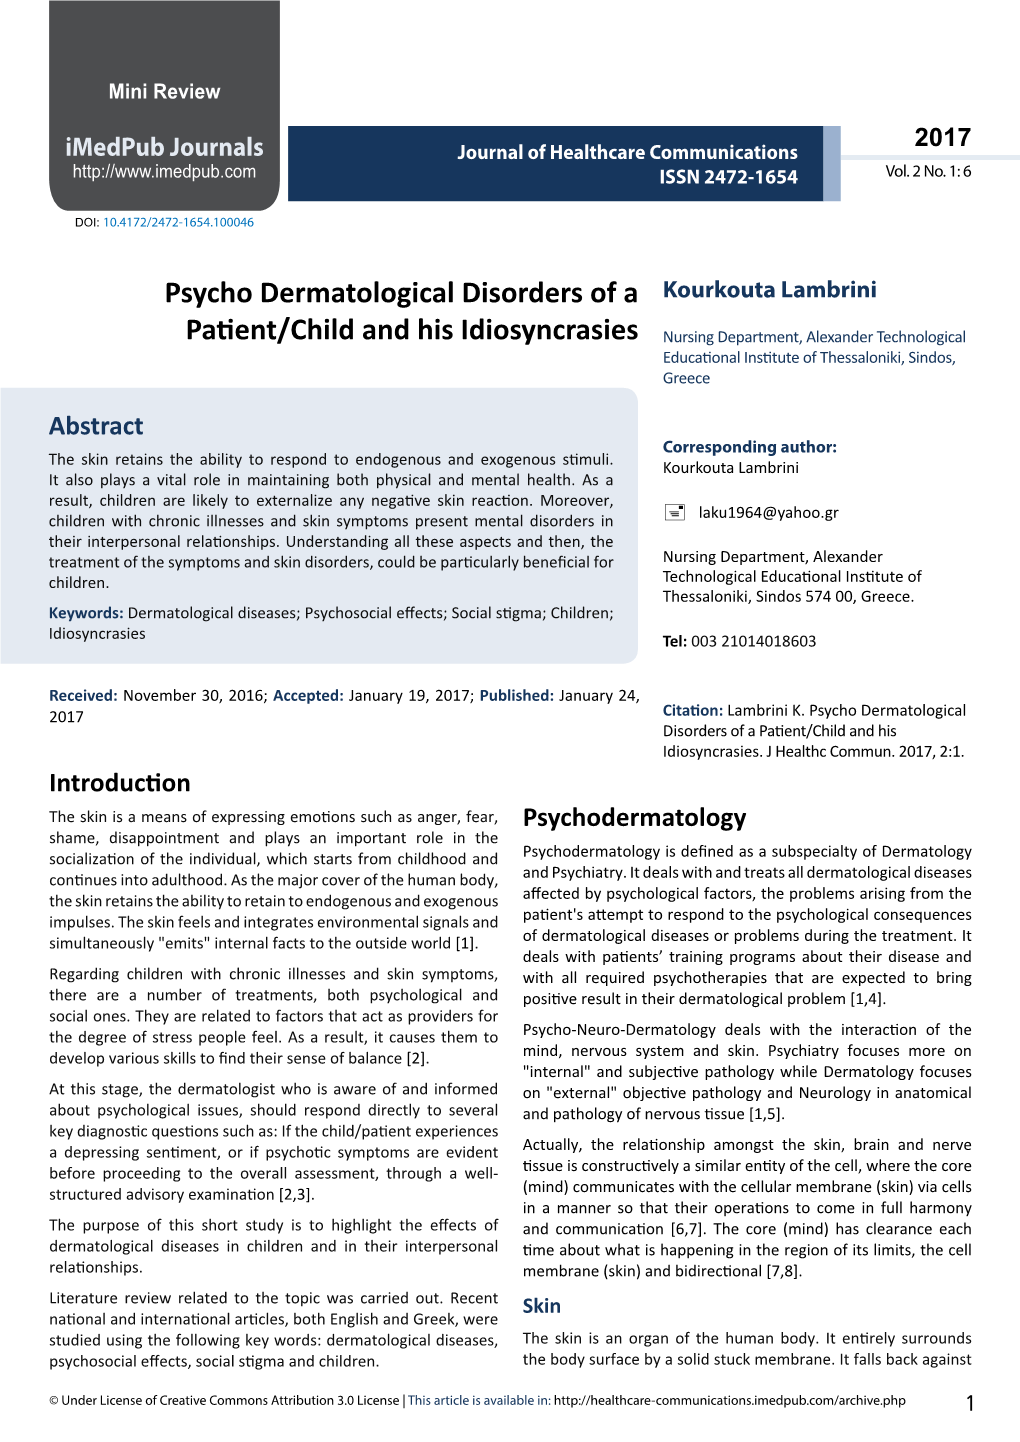 Psycho Dermatological Disorders of a Patient/Child and His Idiosyncrasies